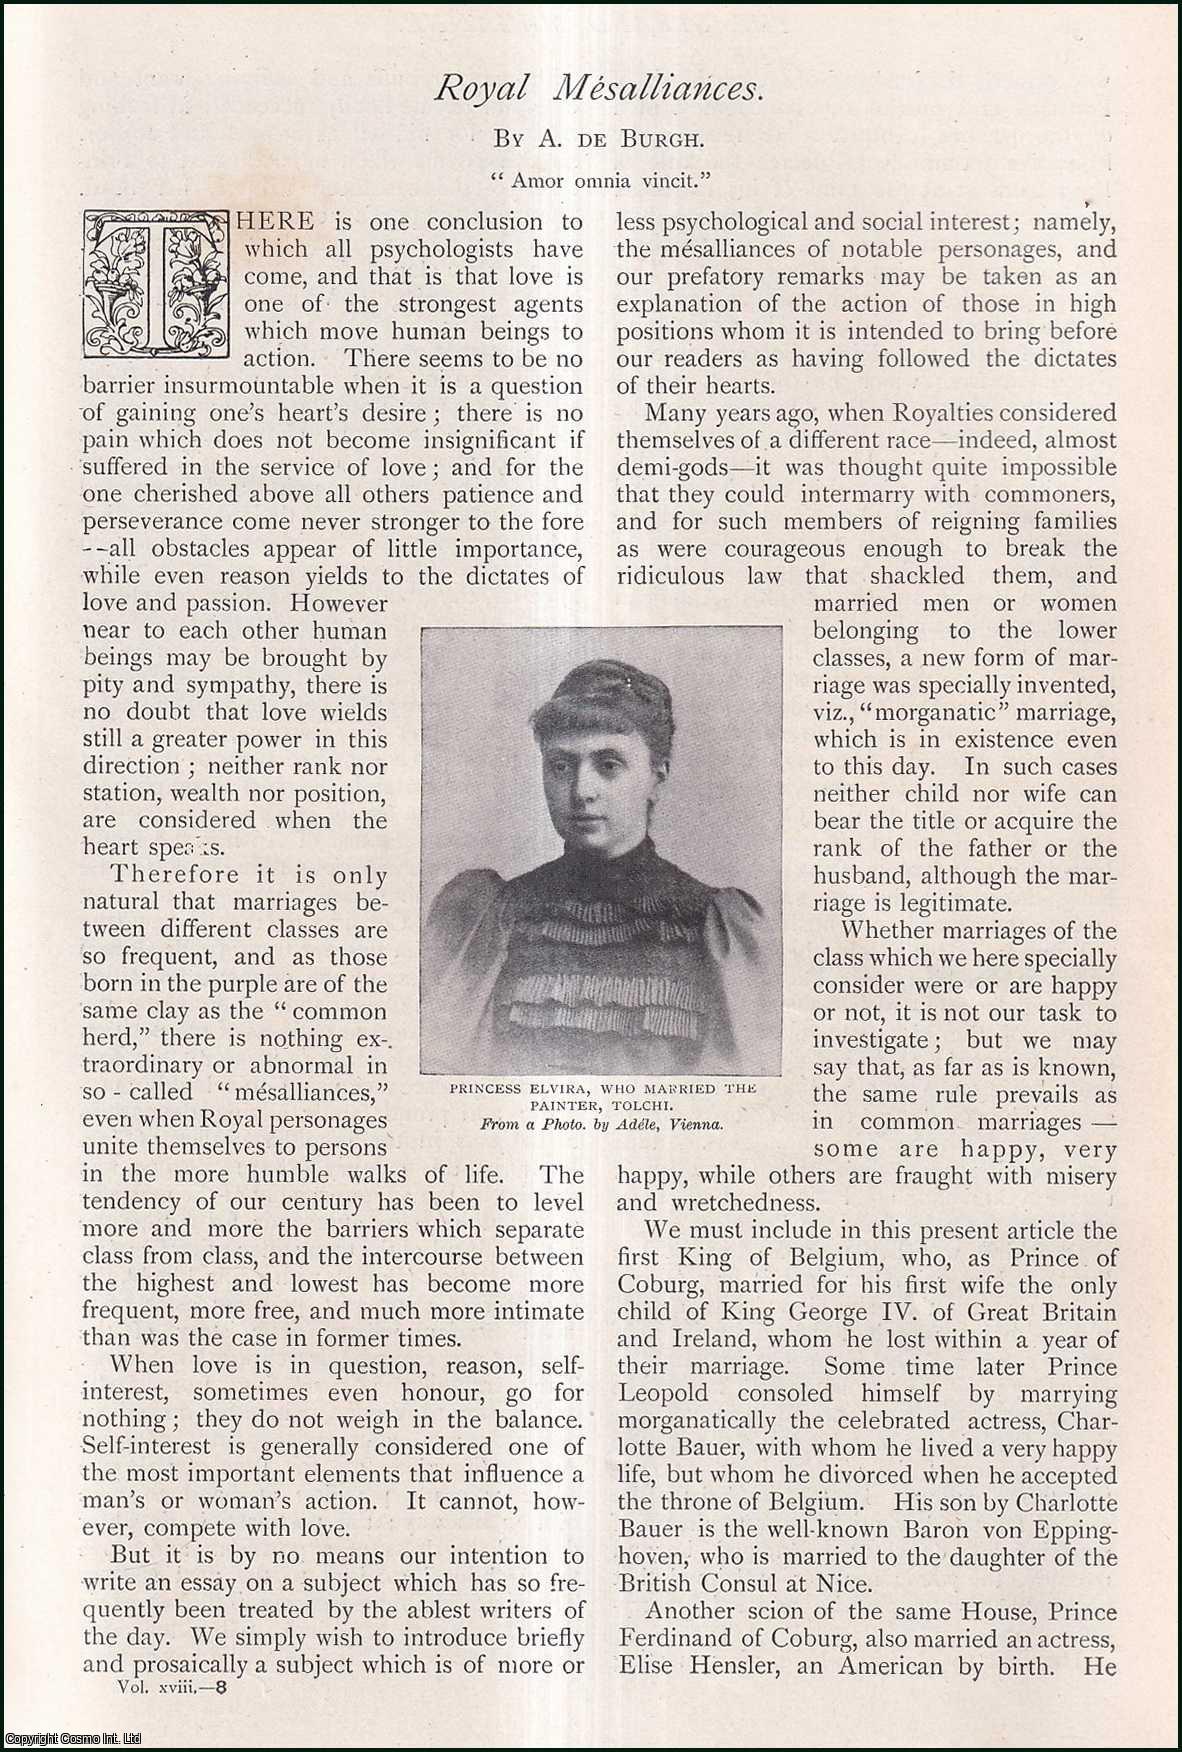 A. De Burgh - Royal Mesalliances : Archduke Henry of Austria ; Baroness Weideck, Wife of Archduke Henry ; Herr Brucks, the Opera-Singer ; Princess Sophia of Bavaria & others. An uncommon original article from The Strand Magazine, 1899.